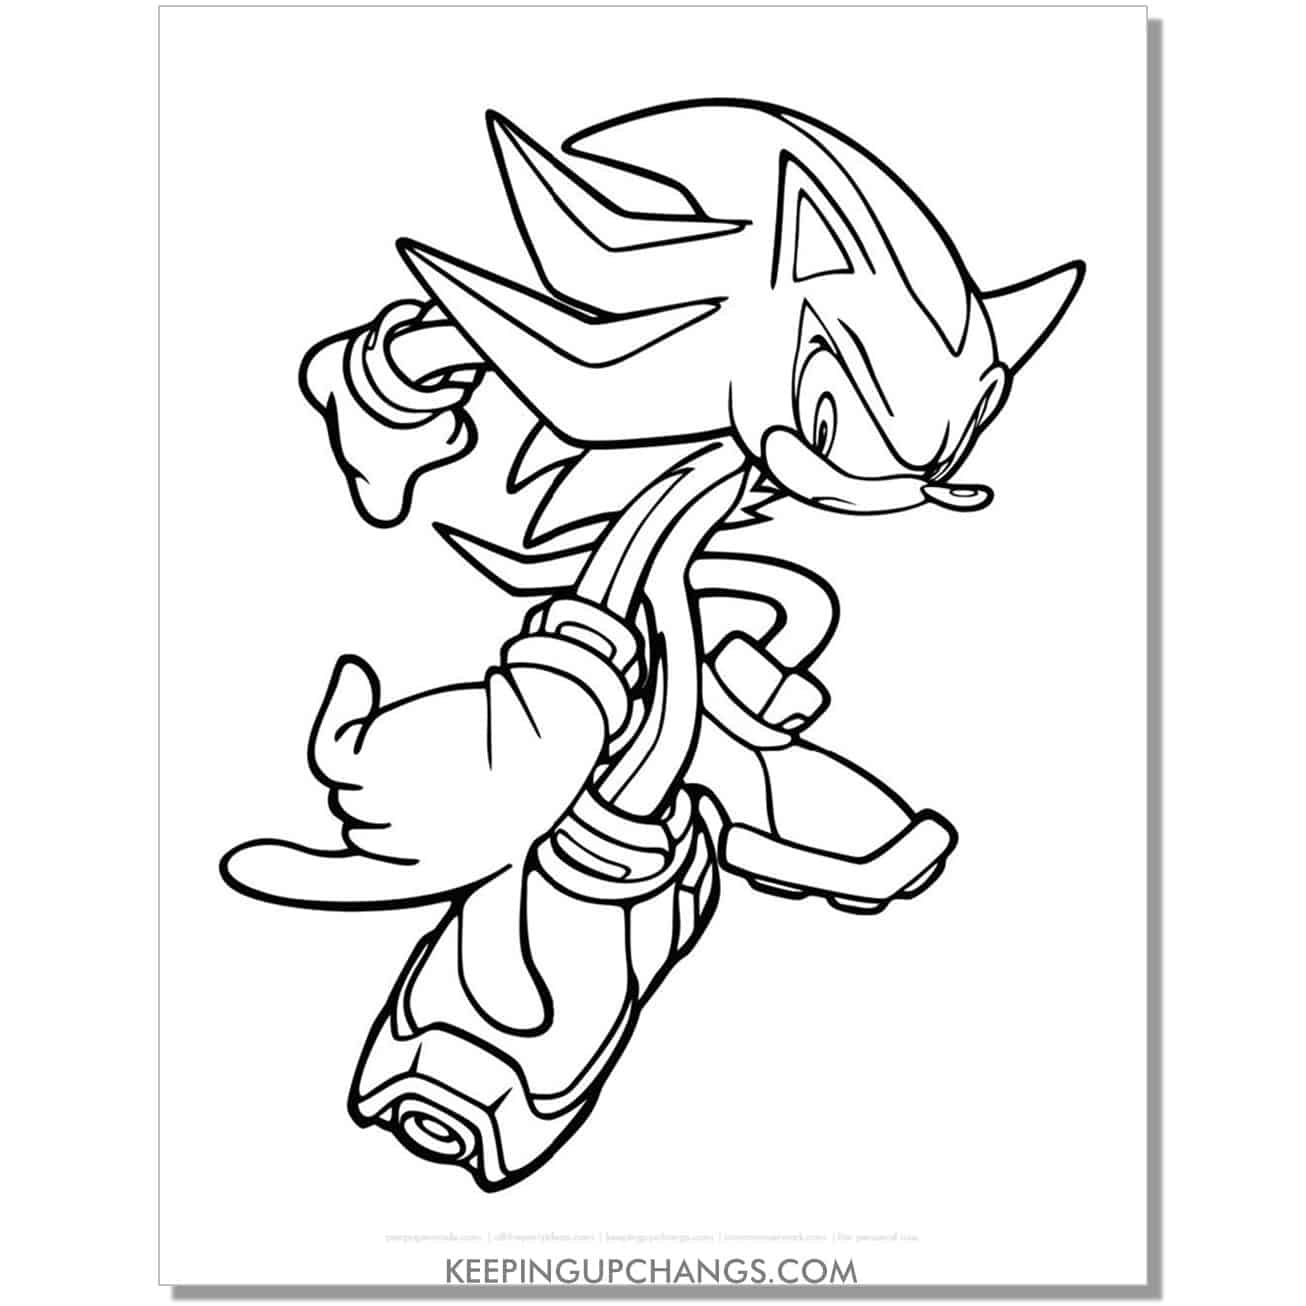 sonic pointing to side coloring page.